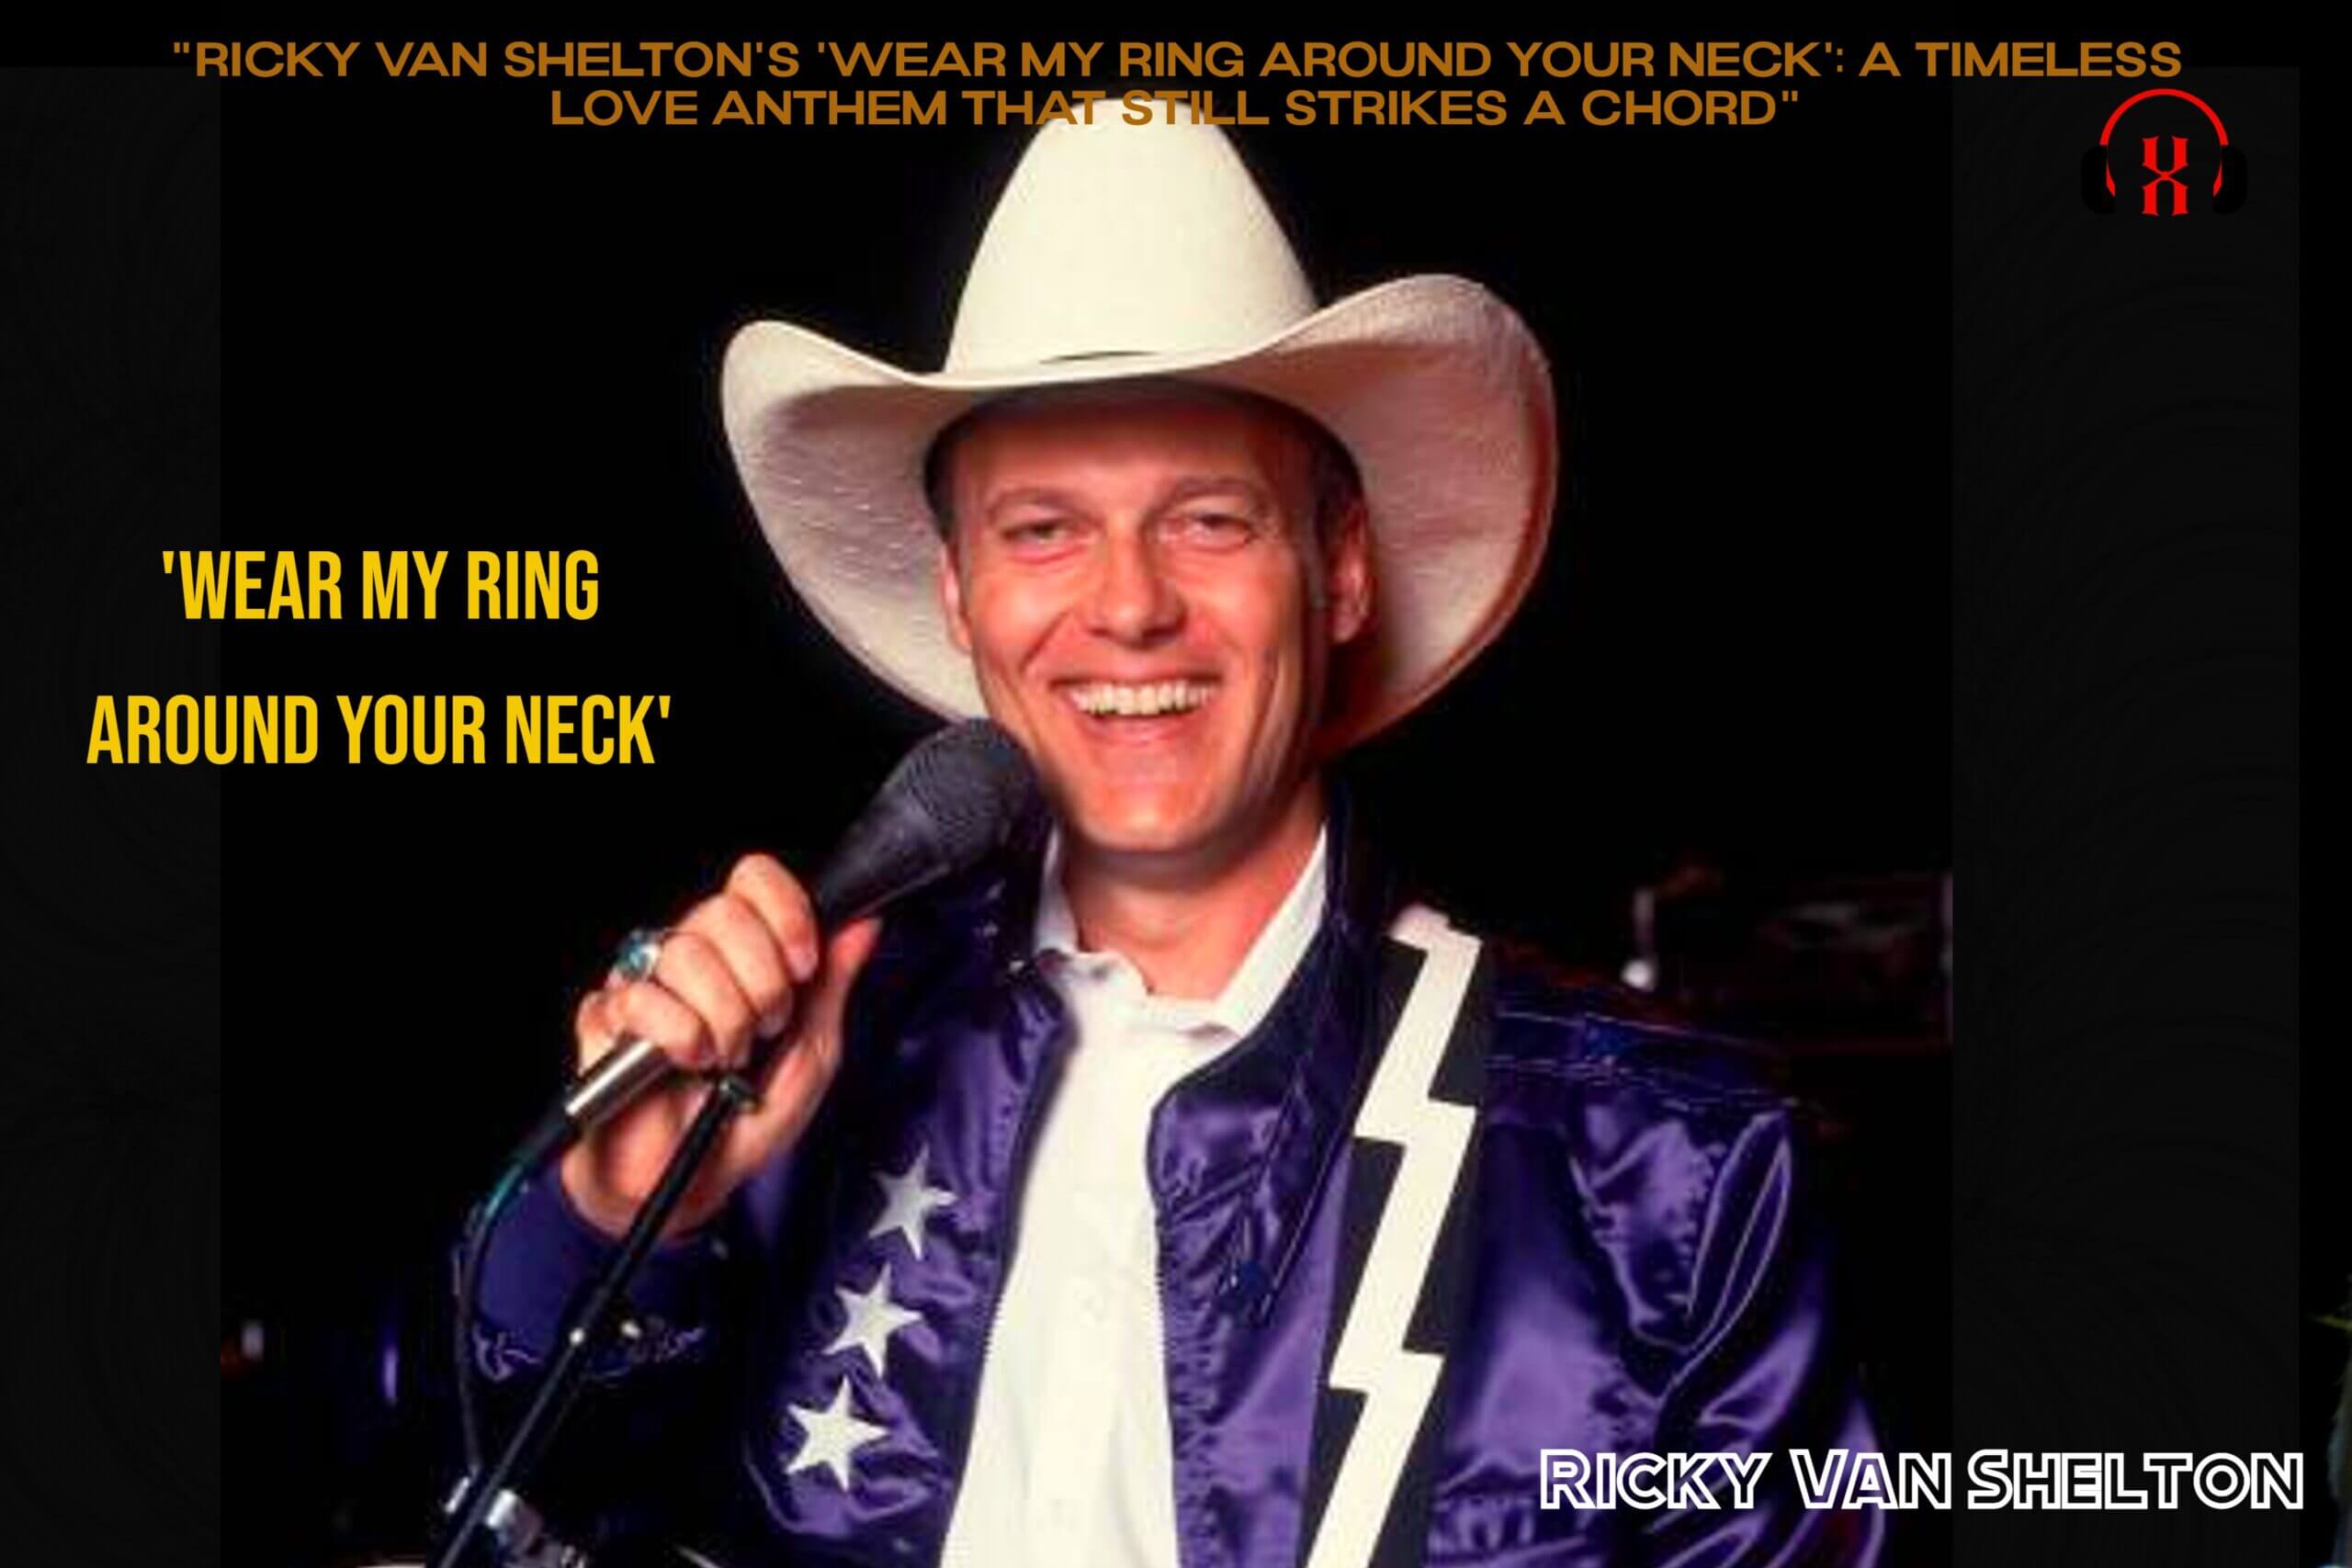 “Ricky Van Shelton’s ‘Wear My Ring Around Your Neck’: A Timeless Love Anthem That Still Strikes a Chord”